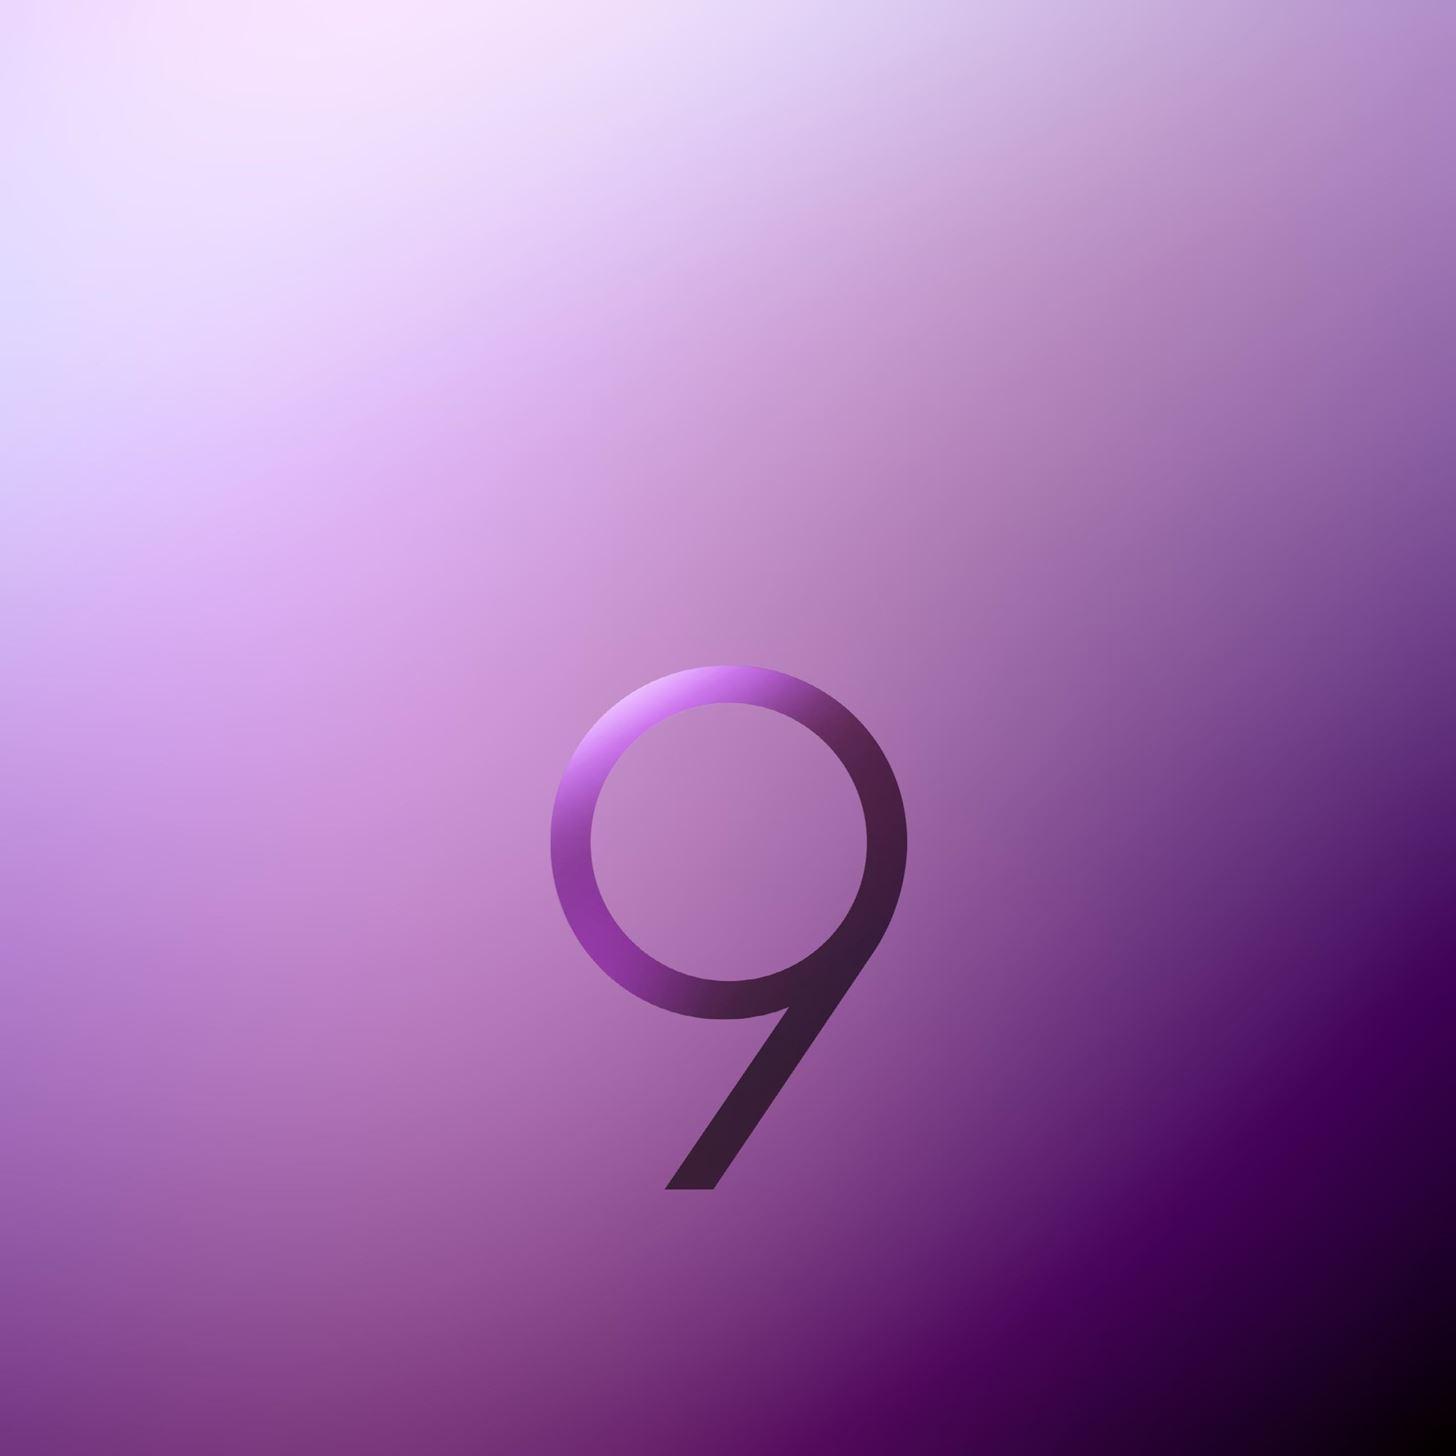 How to Get the Galaxy S9's New Wallpaper on Any Phone « Smartphones